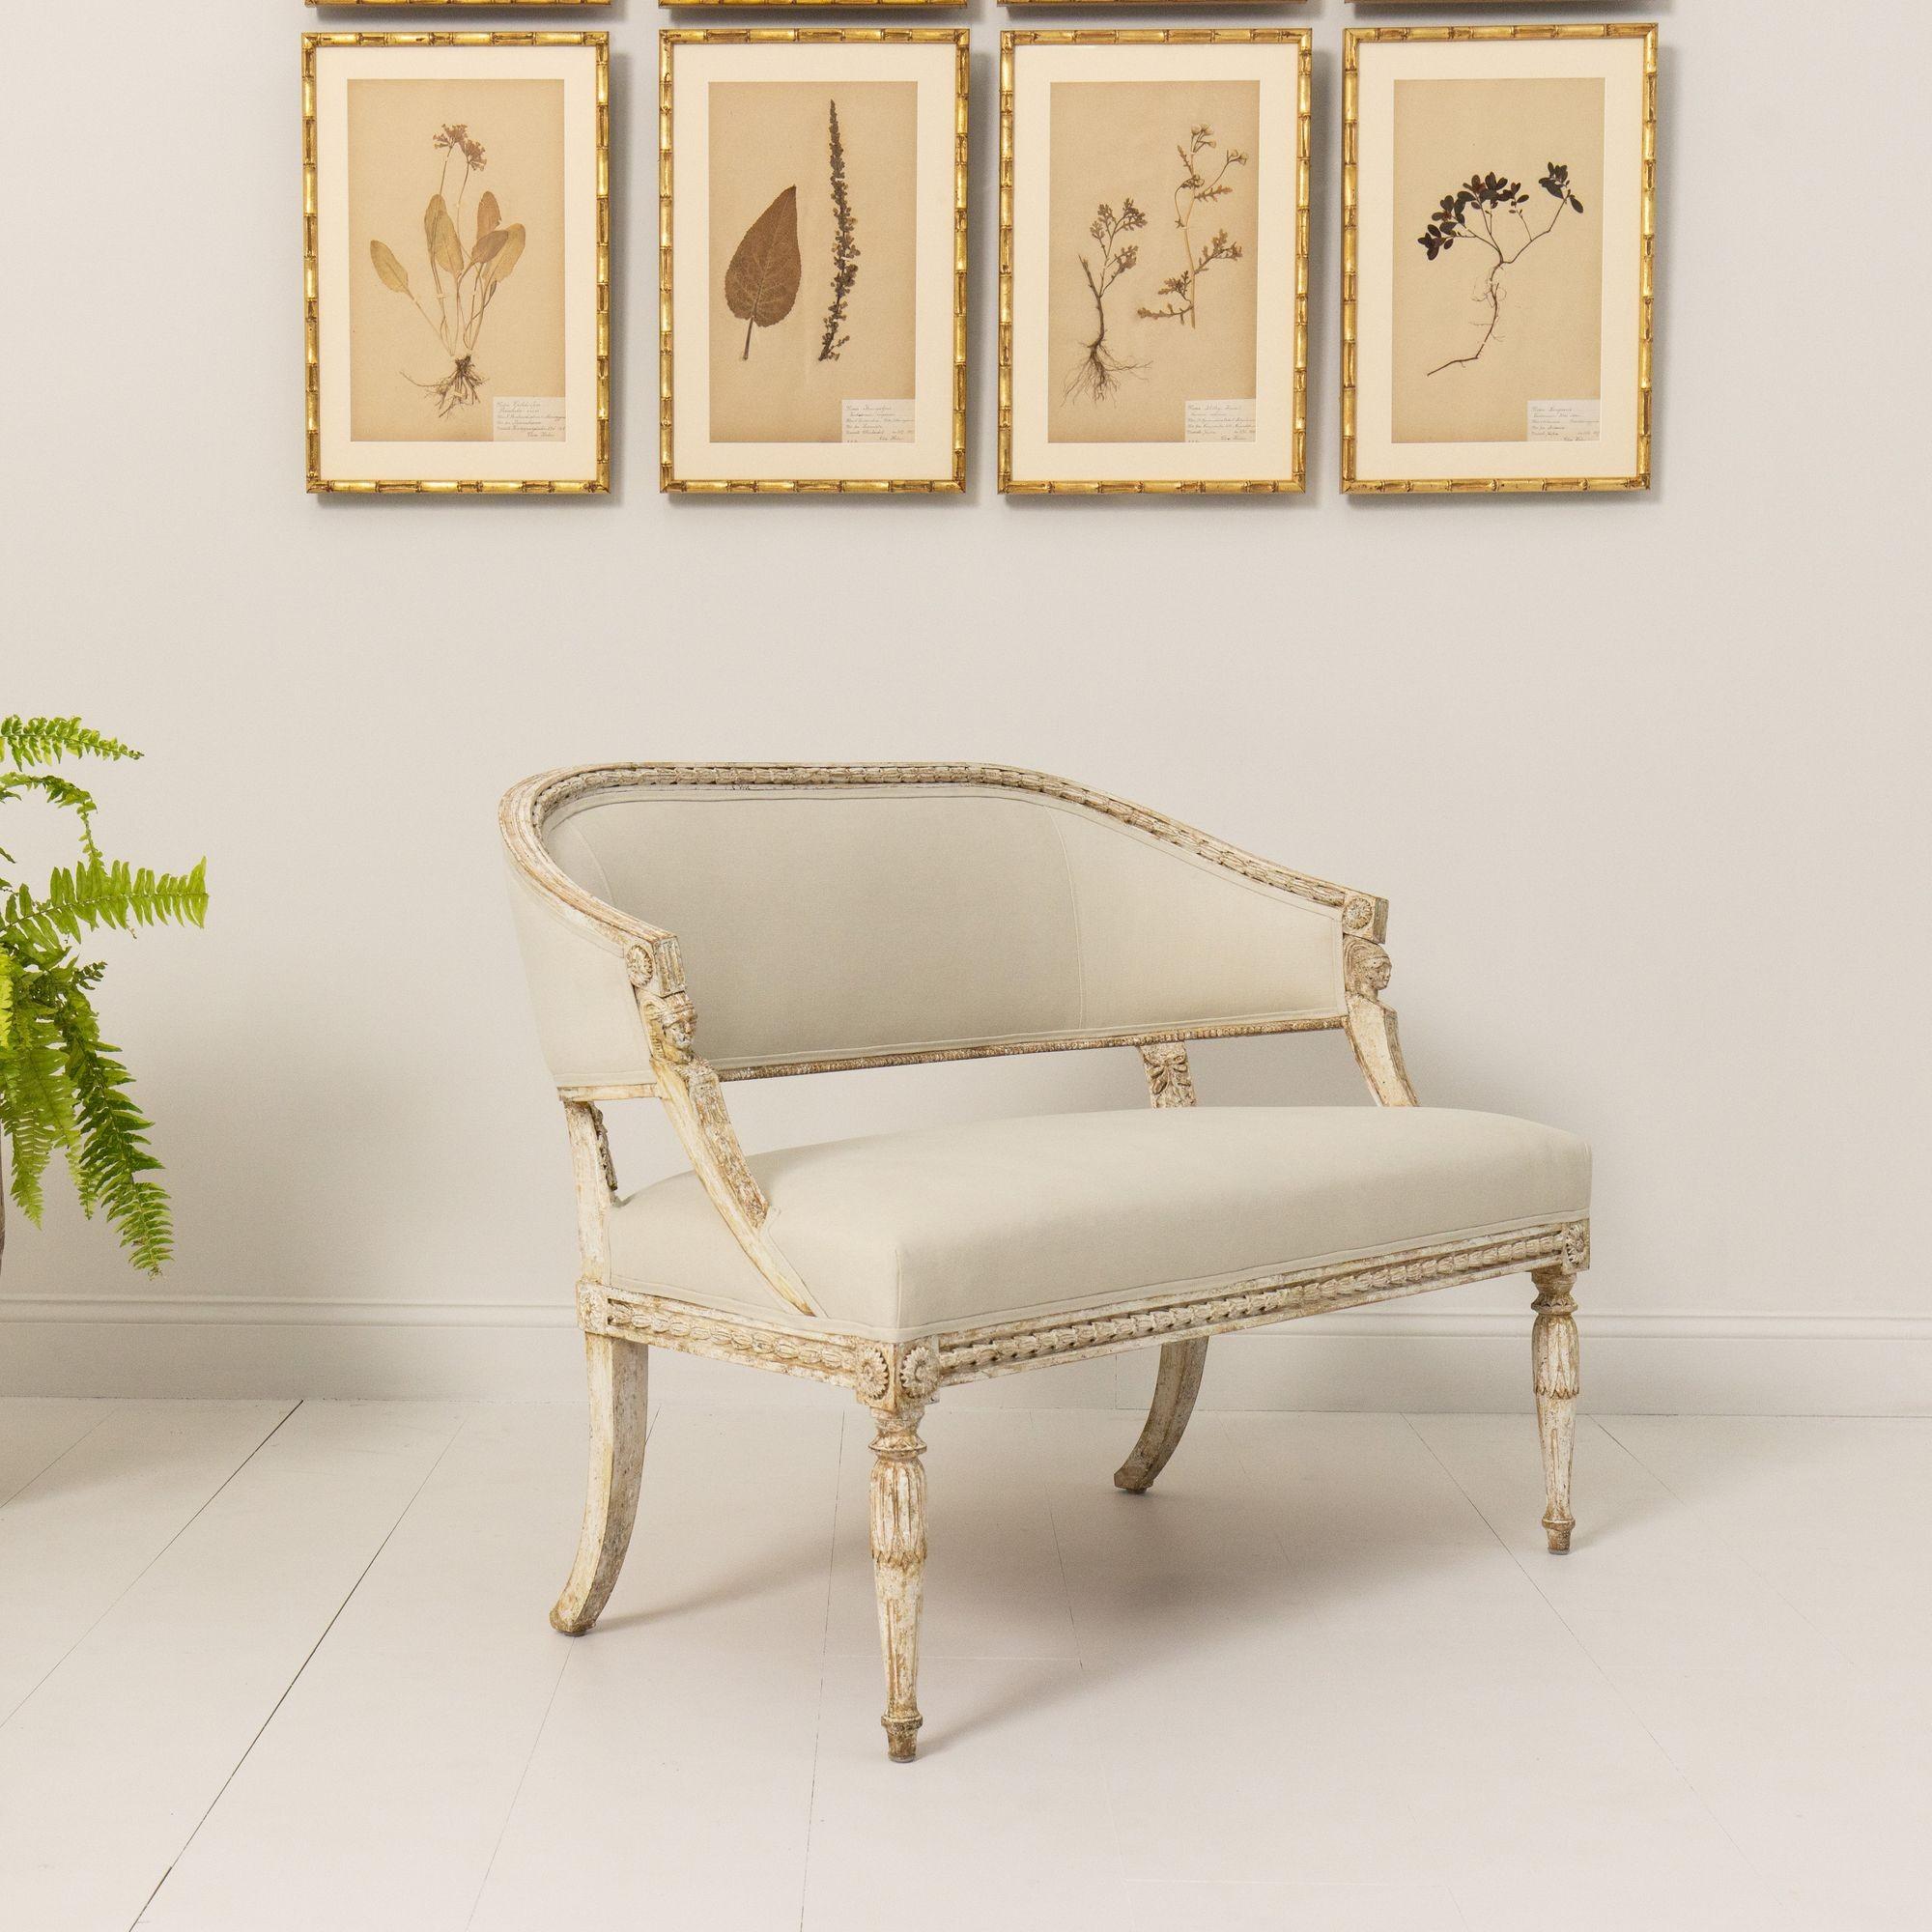 A beautiful Swedish Gustavian settee with a comfortable barrel-style back, hand-scraped to the original paint surface and newly upholstered in linen. The frame features carved bell flowers with sphinx heads on the arms. The front legs are adorned